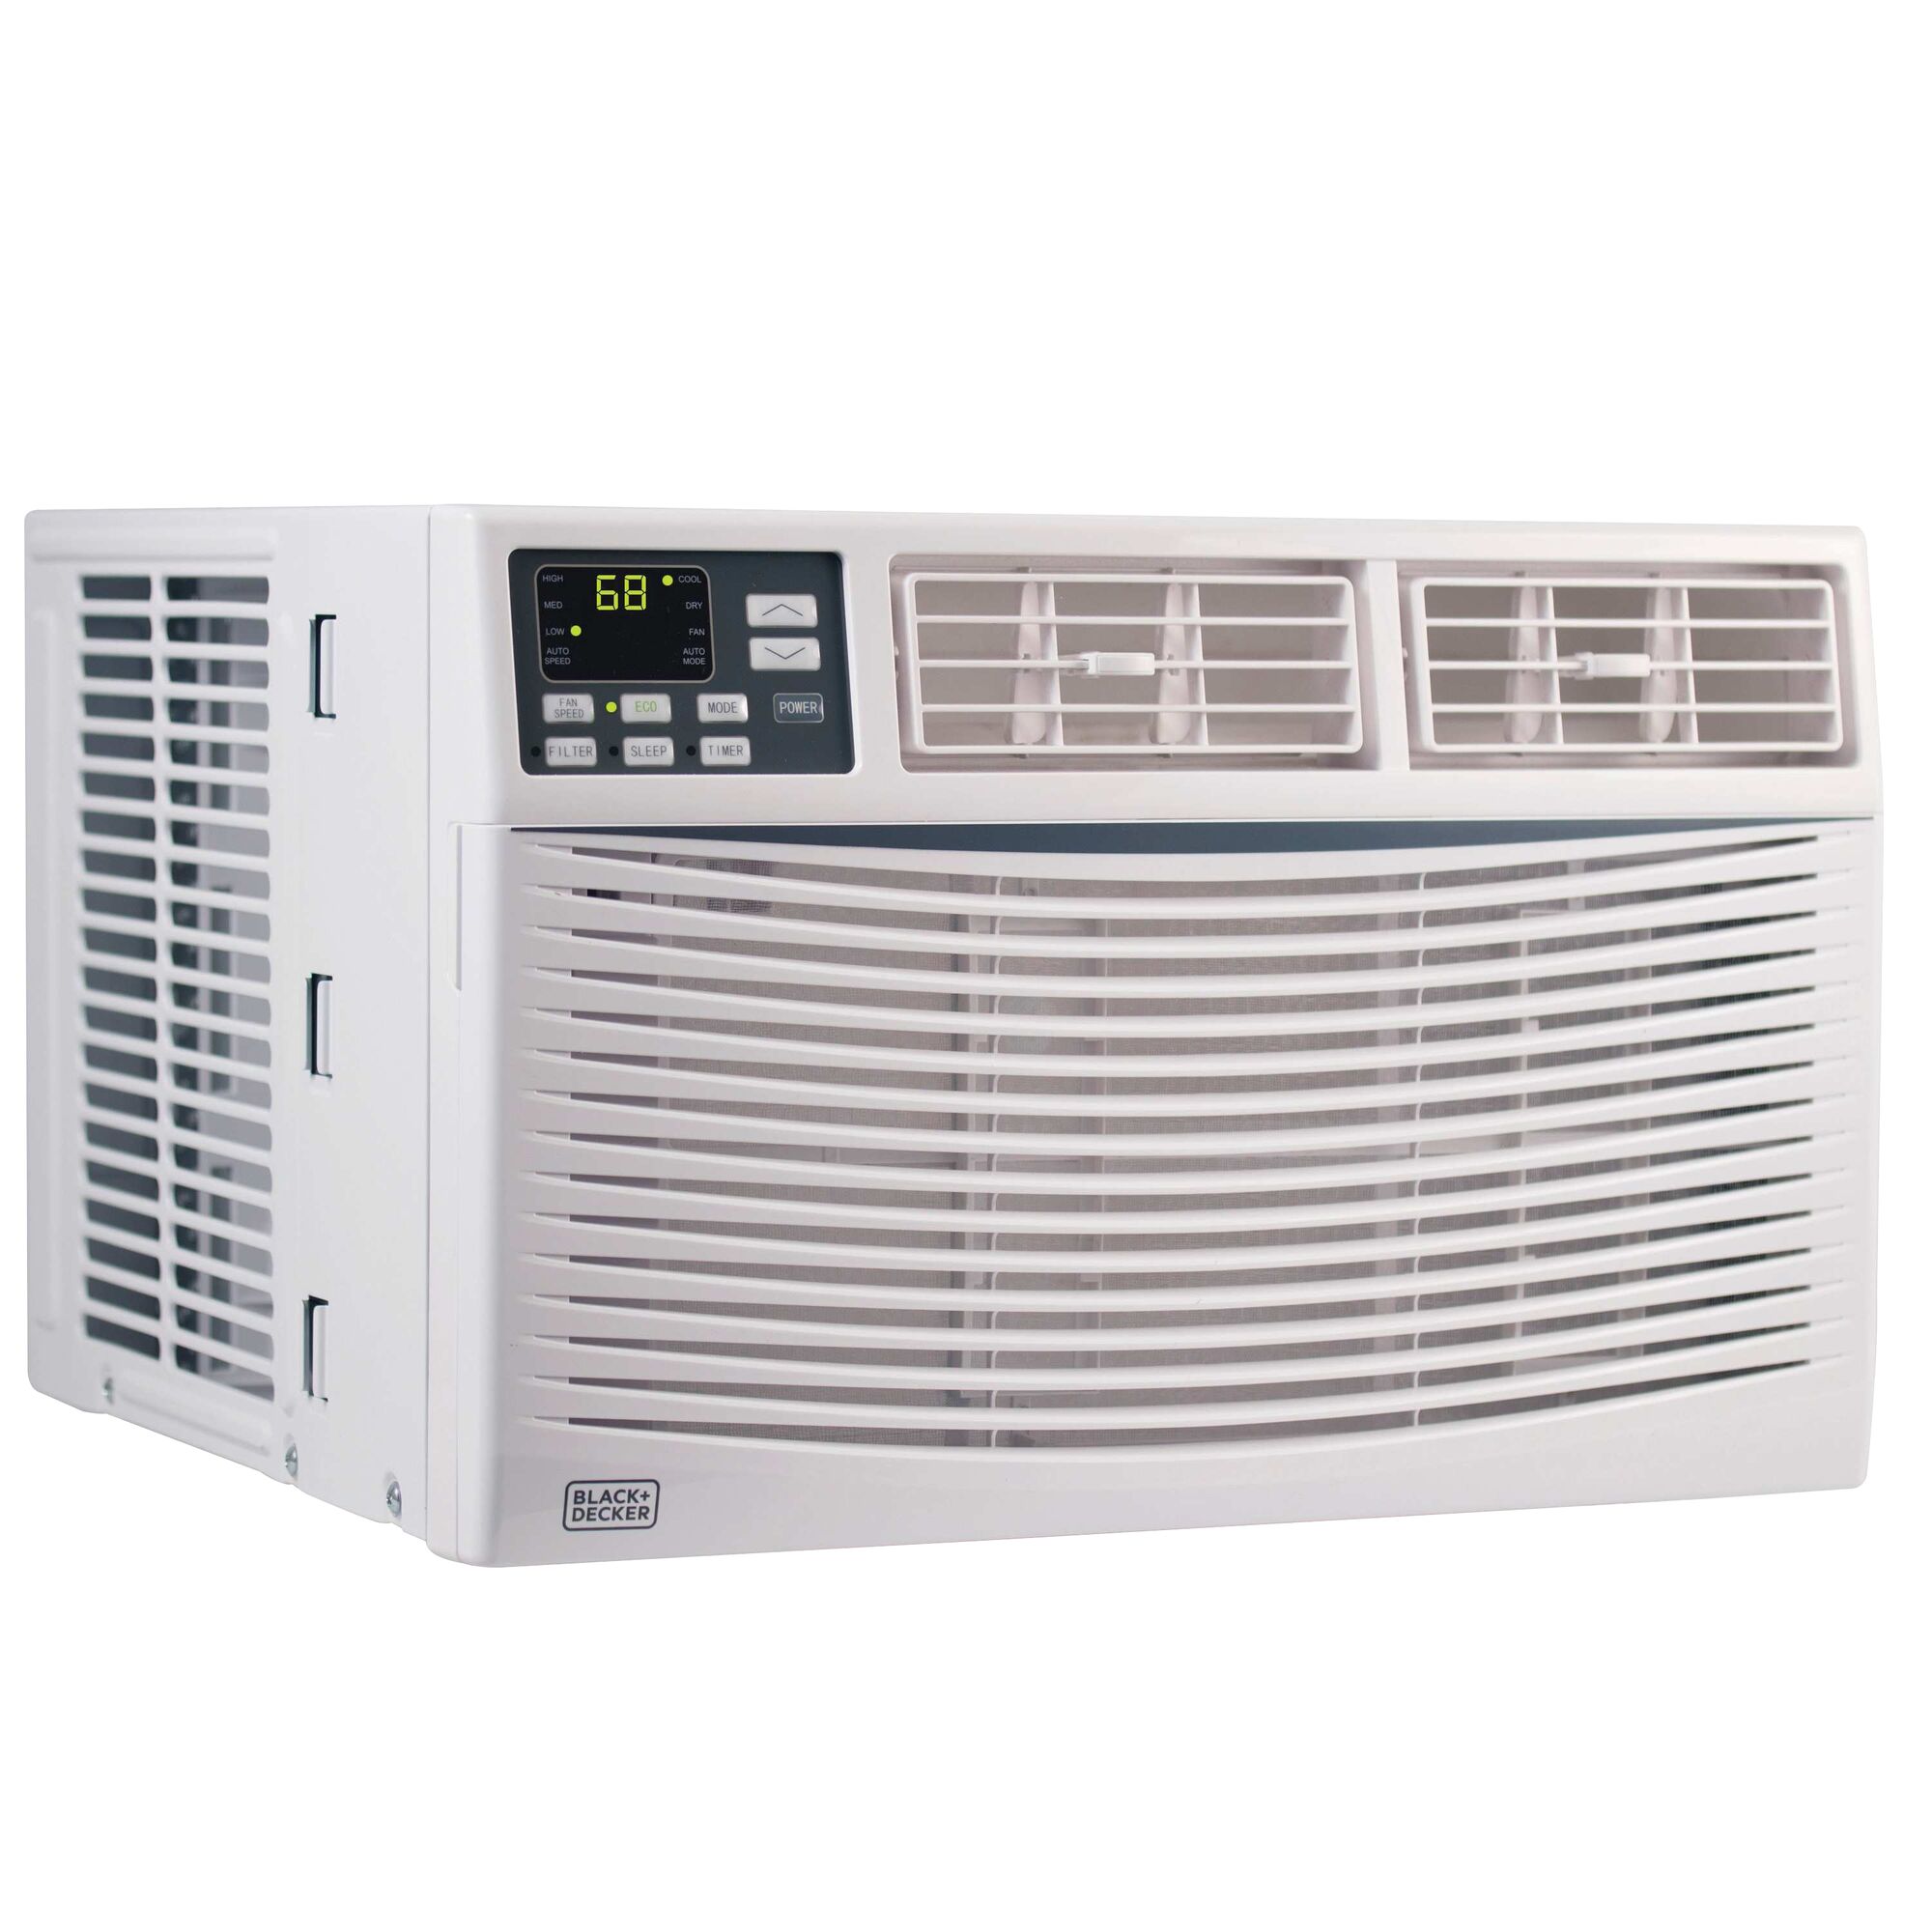 Side profile of the 6000 BTU air conditioner by BLACK+DECKER